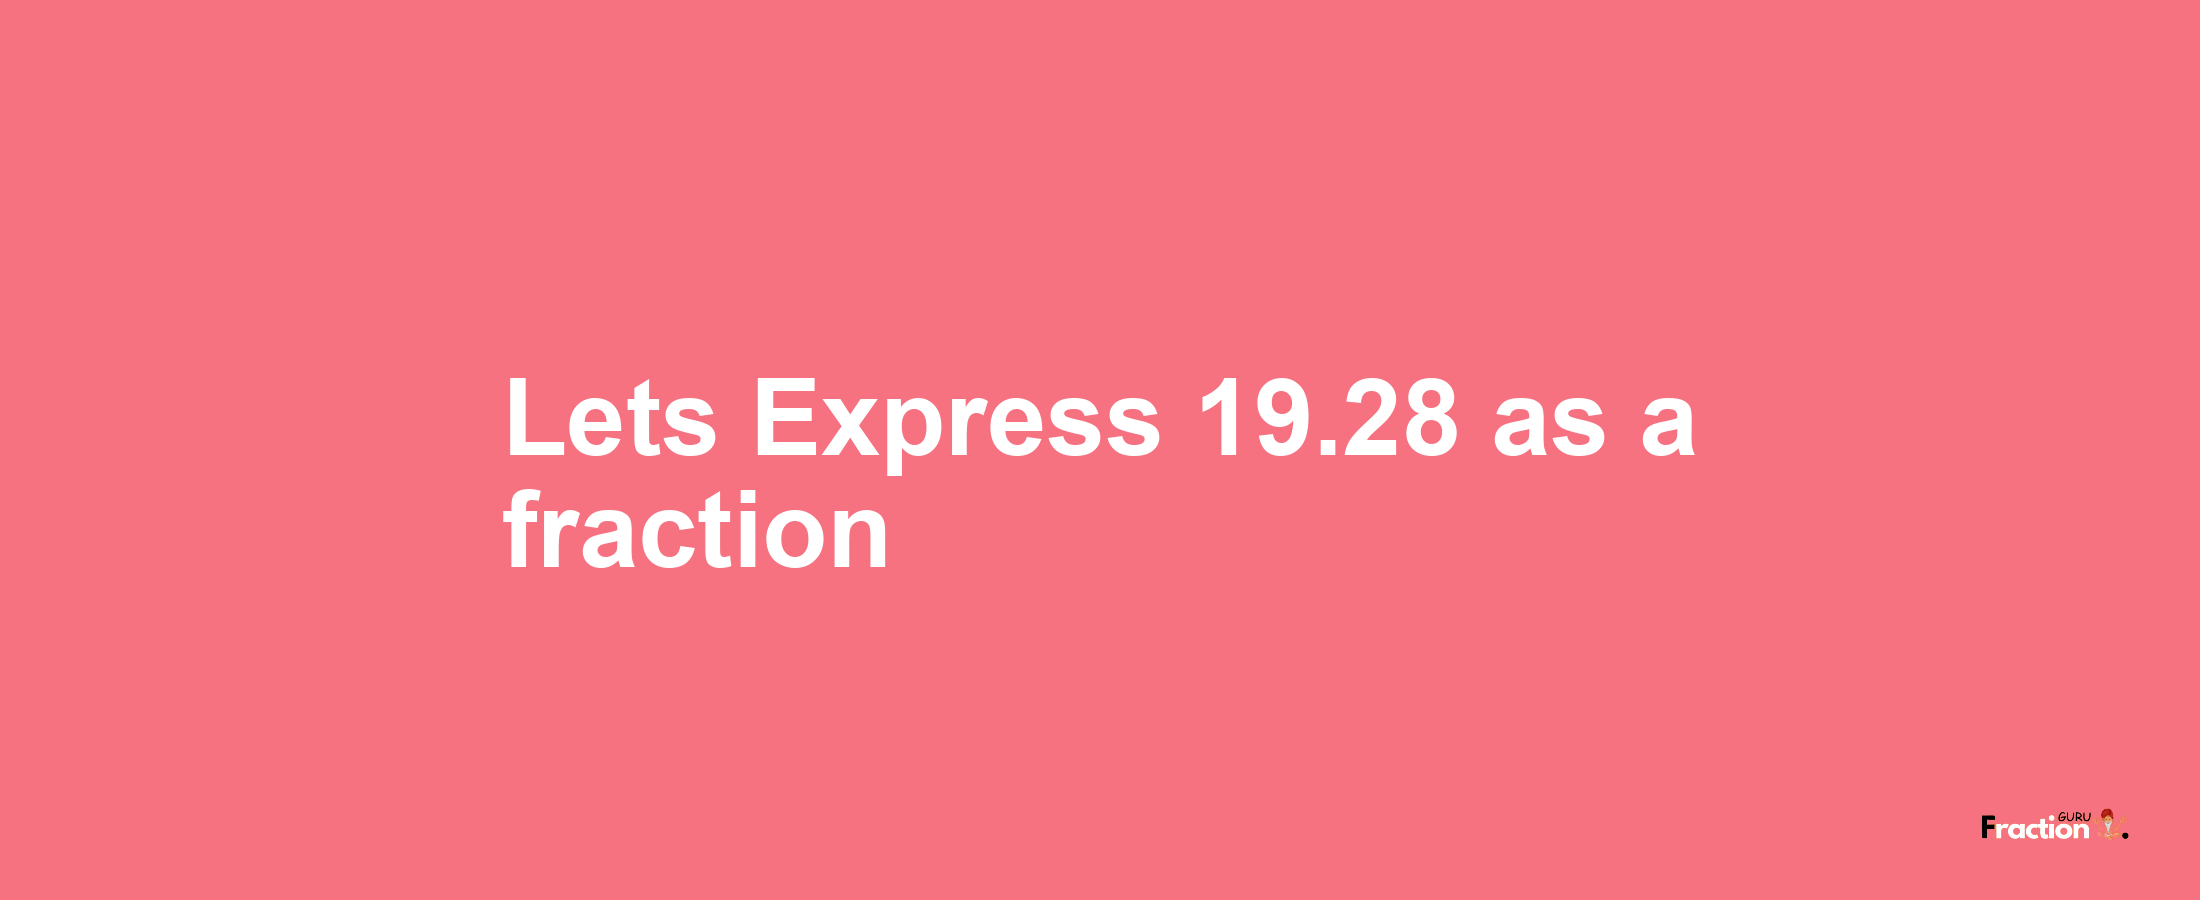 Lets Express 19.28 as afraction